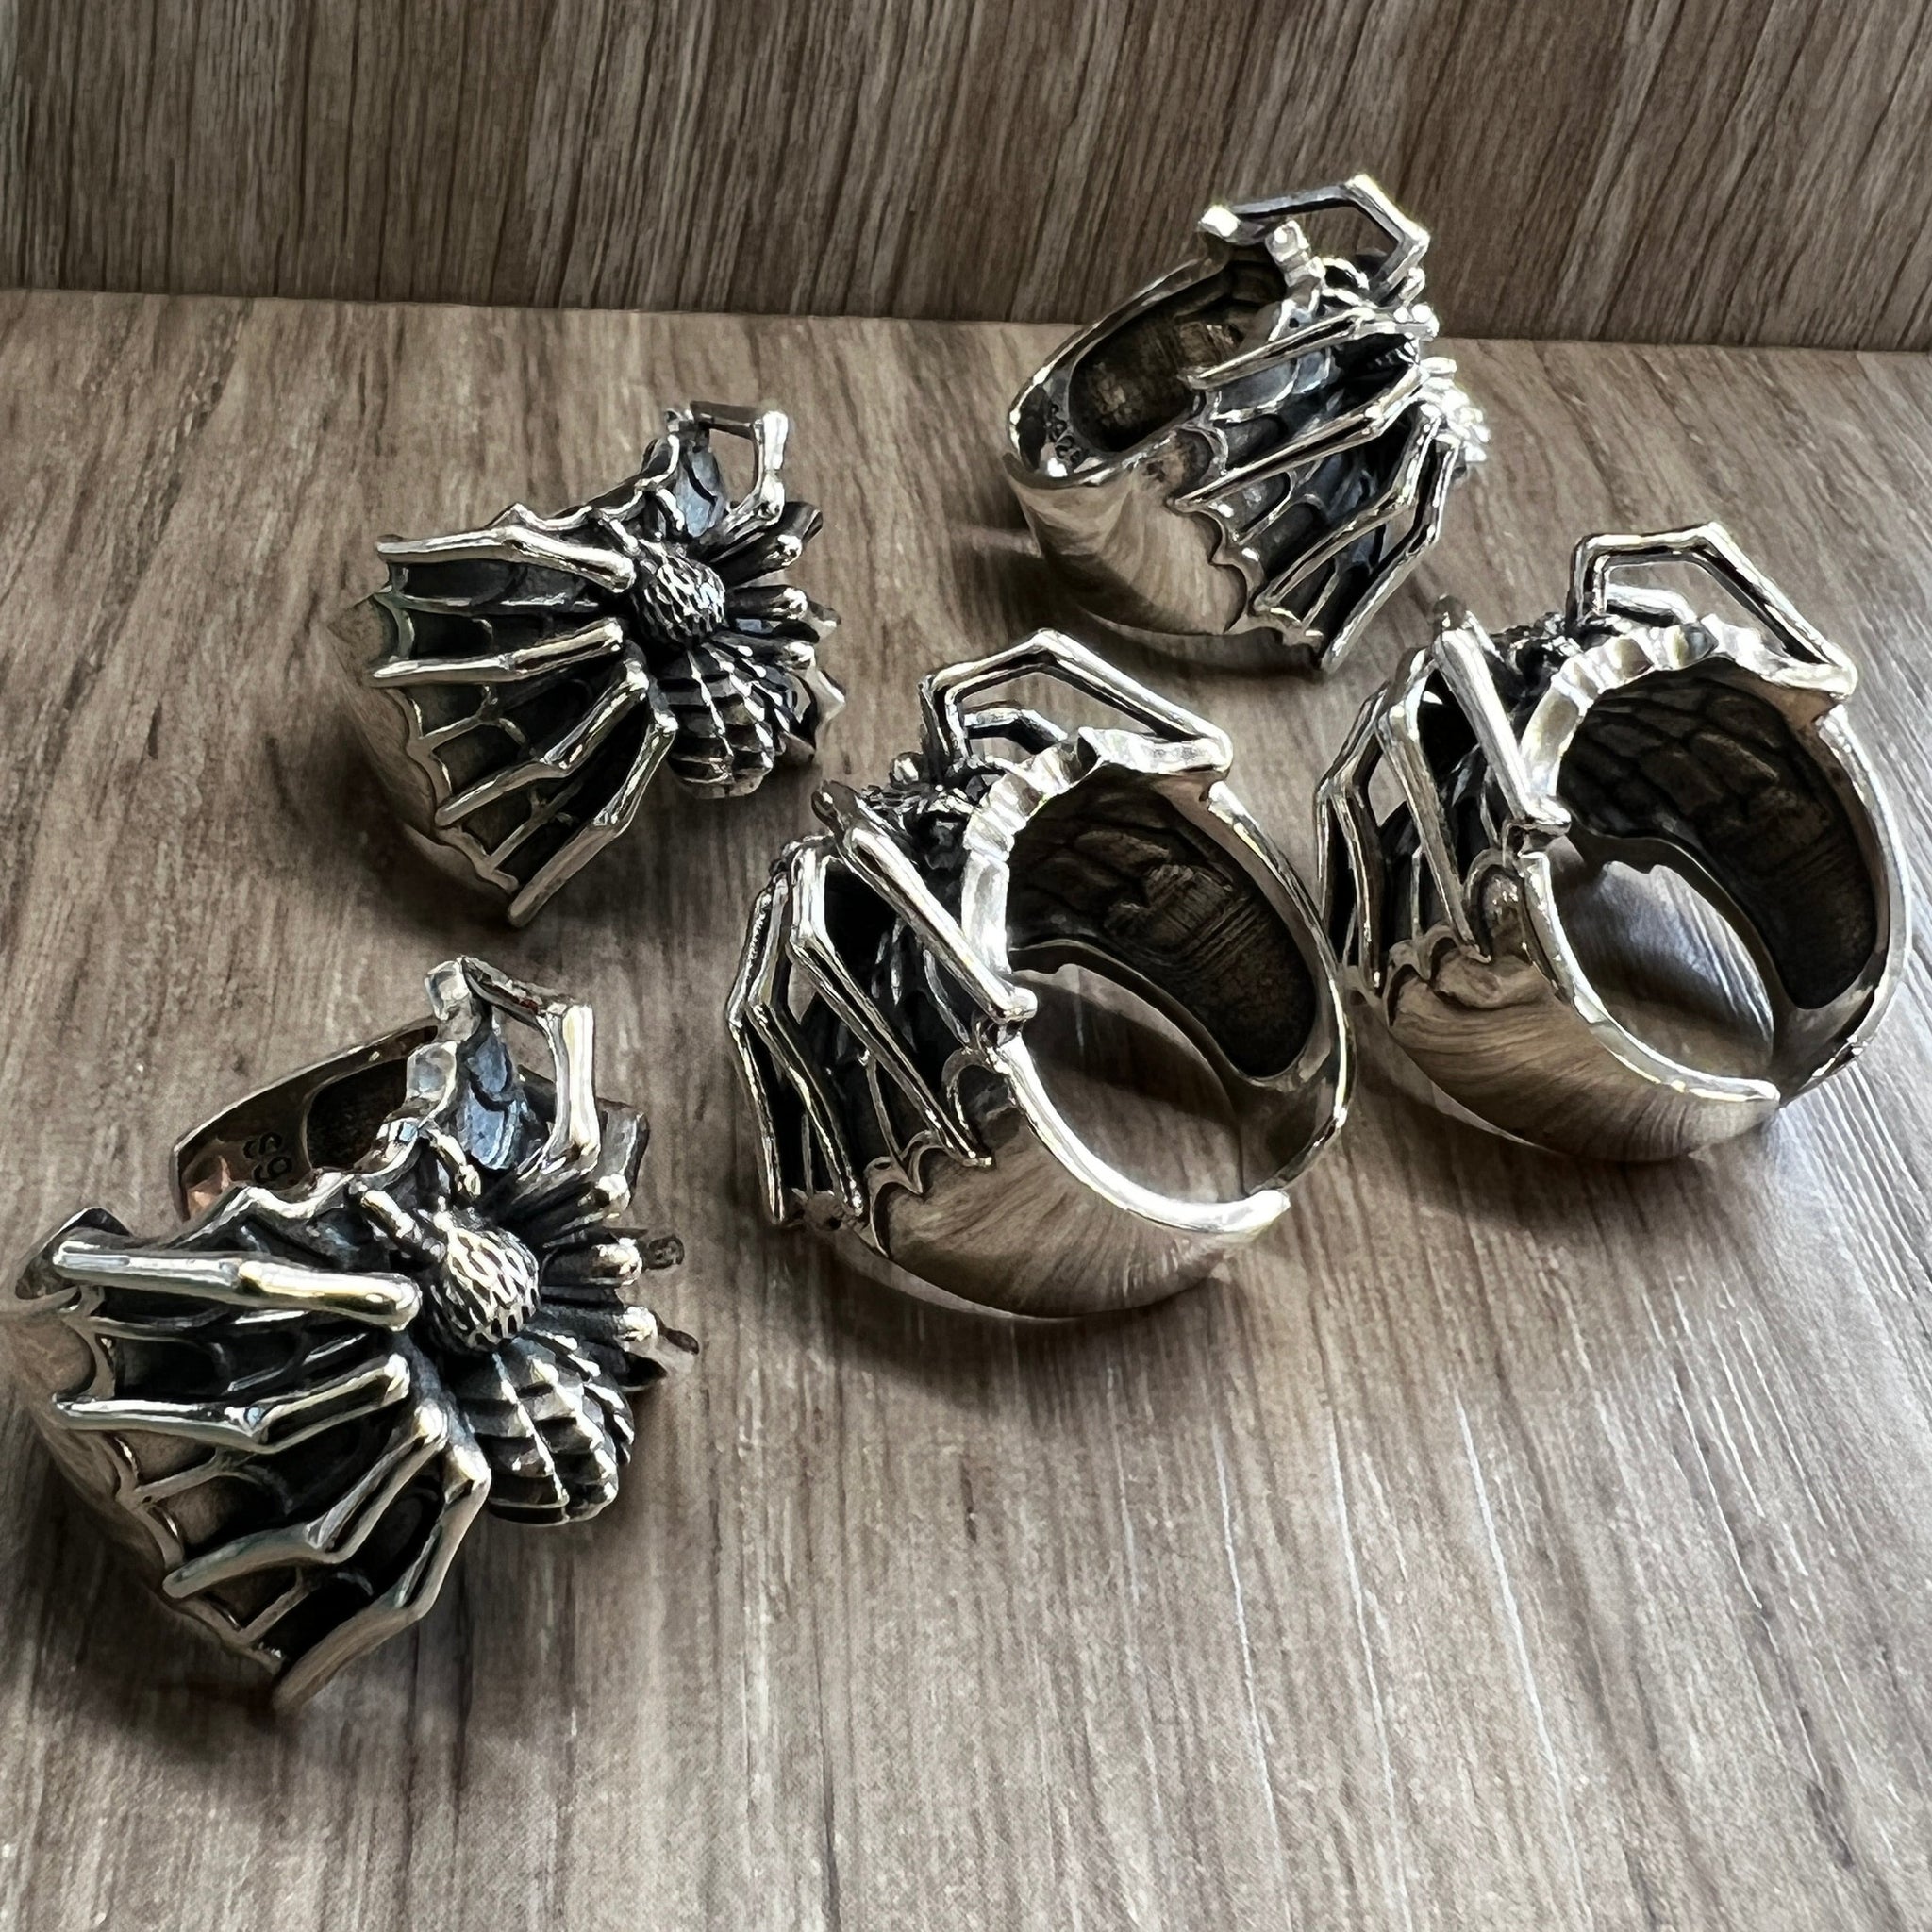 Spider Ring - The Great Frog | Silver jewelry, Silver rings, Yellow diamond  jewelry